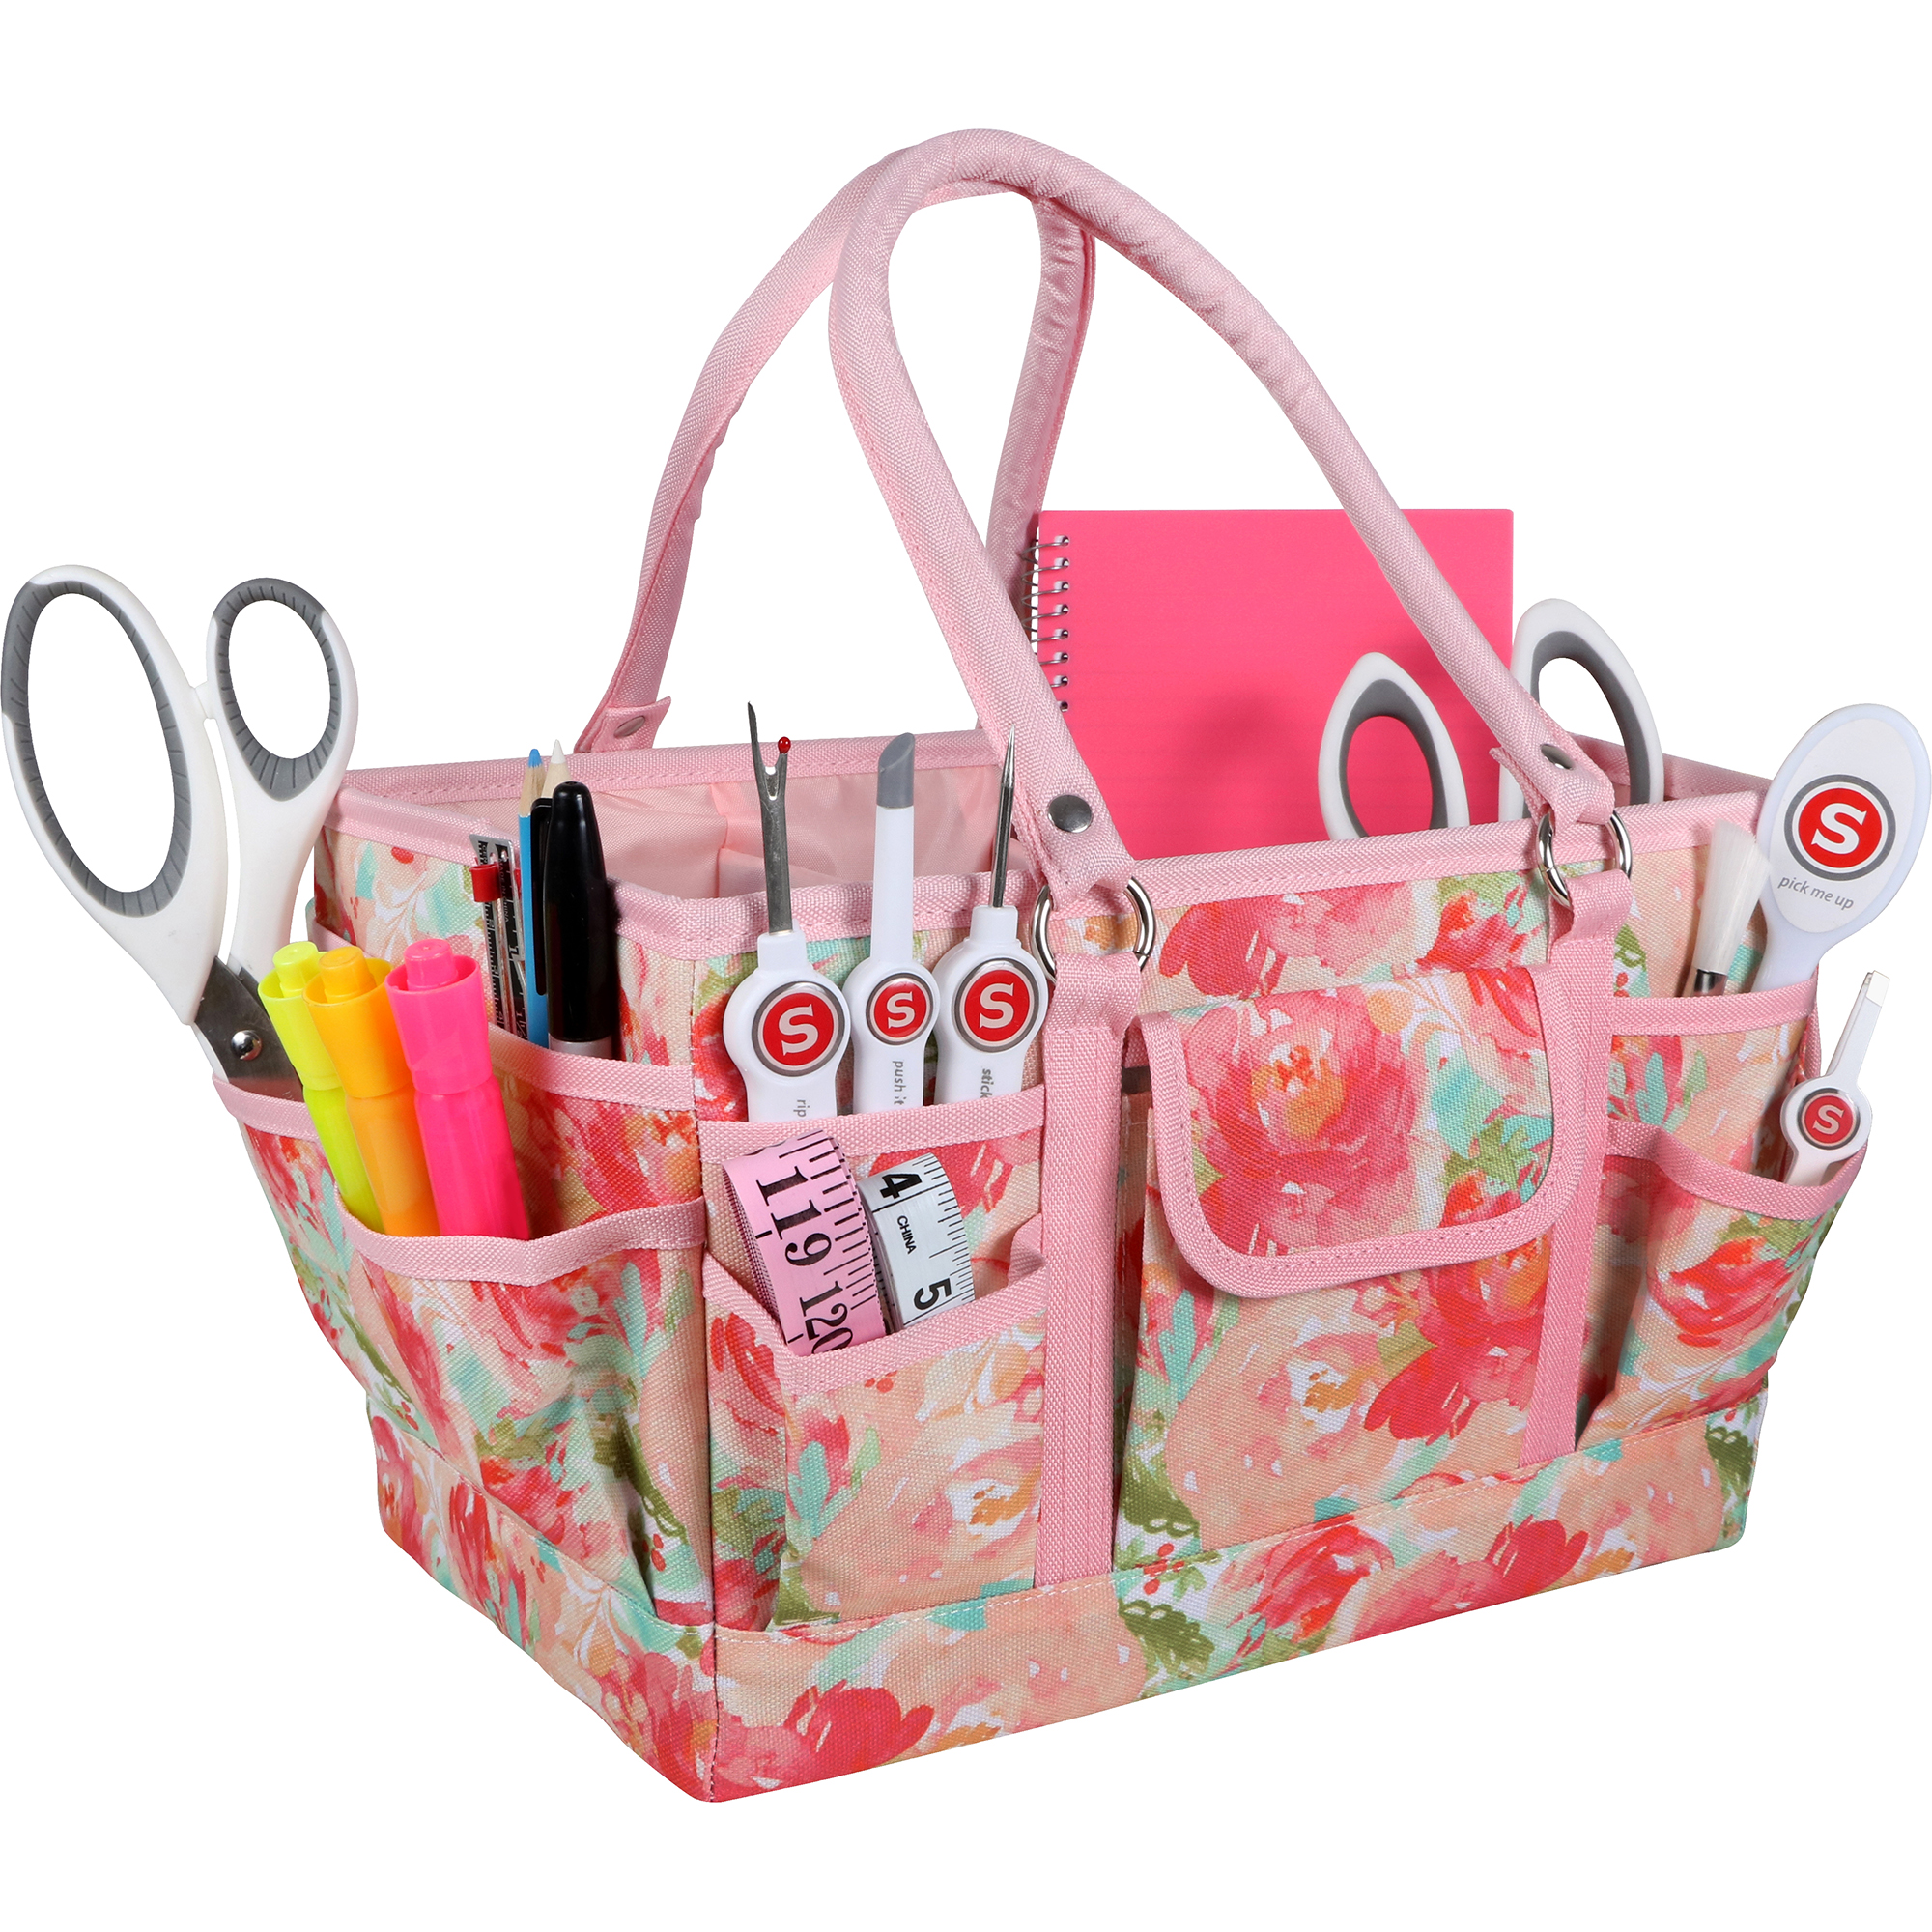 SINGER Sewing Storage Organizer Collapsible Tote Caddy, Craft Storage, Watercolor Floral Print, 1 Count - image 1 of 13